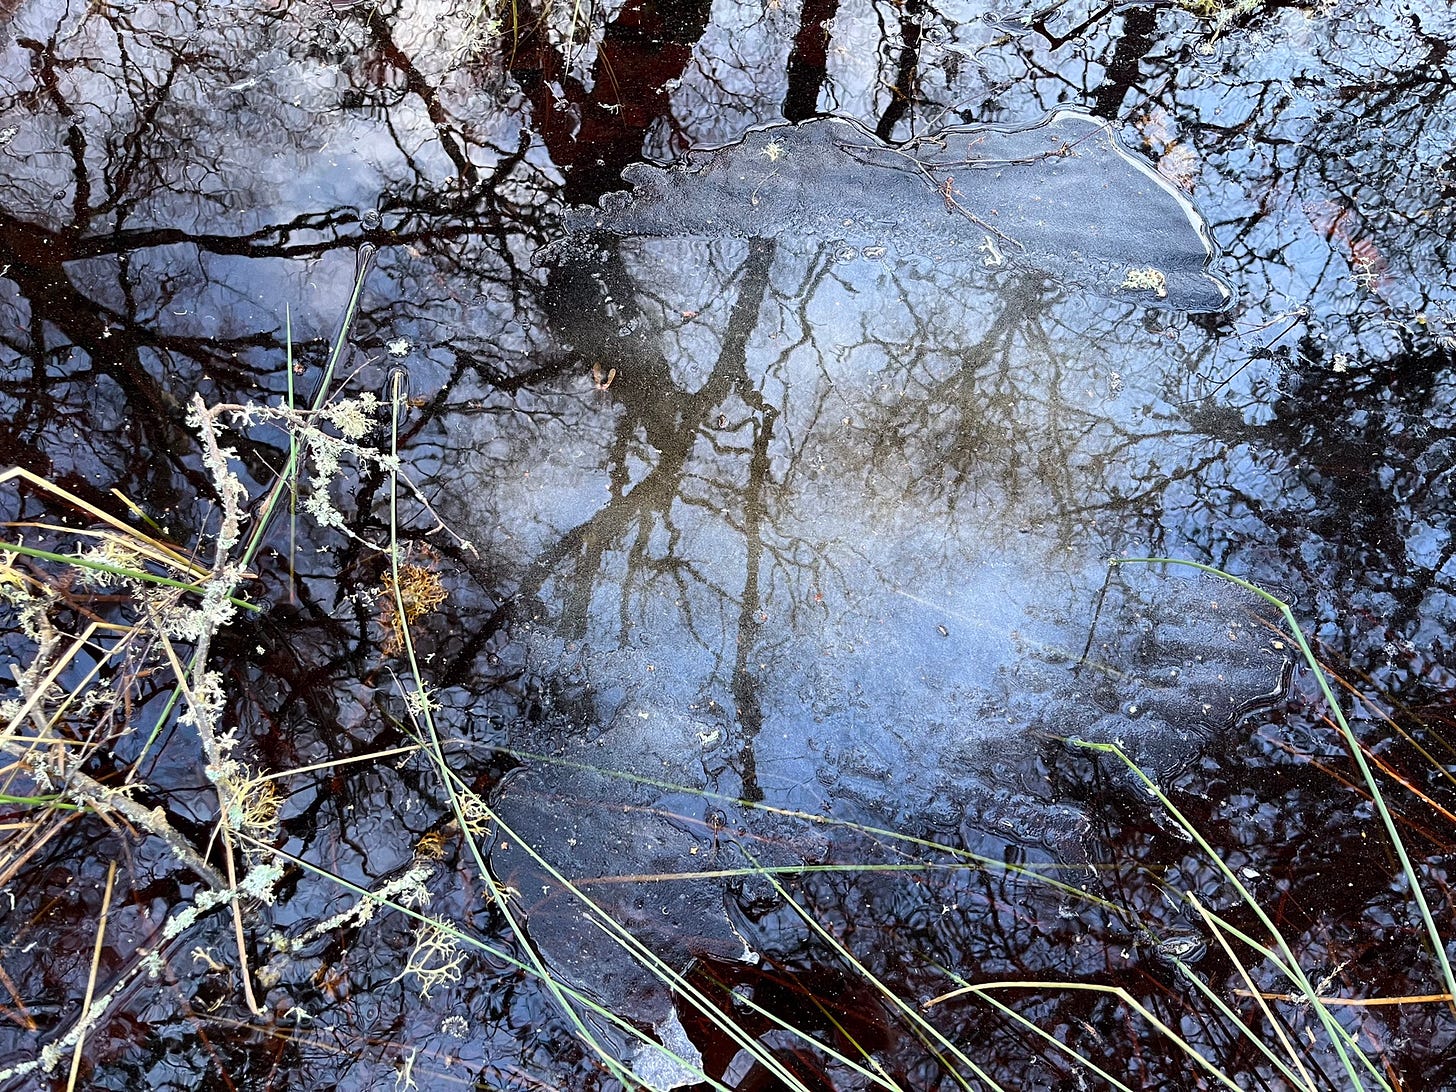 Ice floats on water, both reflect the birch trees and blue sky above.  The pool is fringed by grass and twig, punctuated by lichen.Ice floats on water, both reflect the birch trees and blue sky above.  Looking down the pool is fringed by grass and twig, punctuated by lichen.